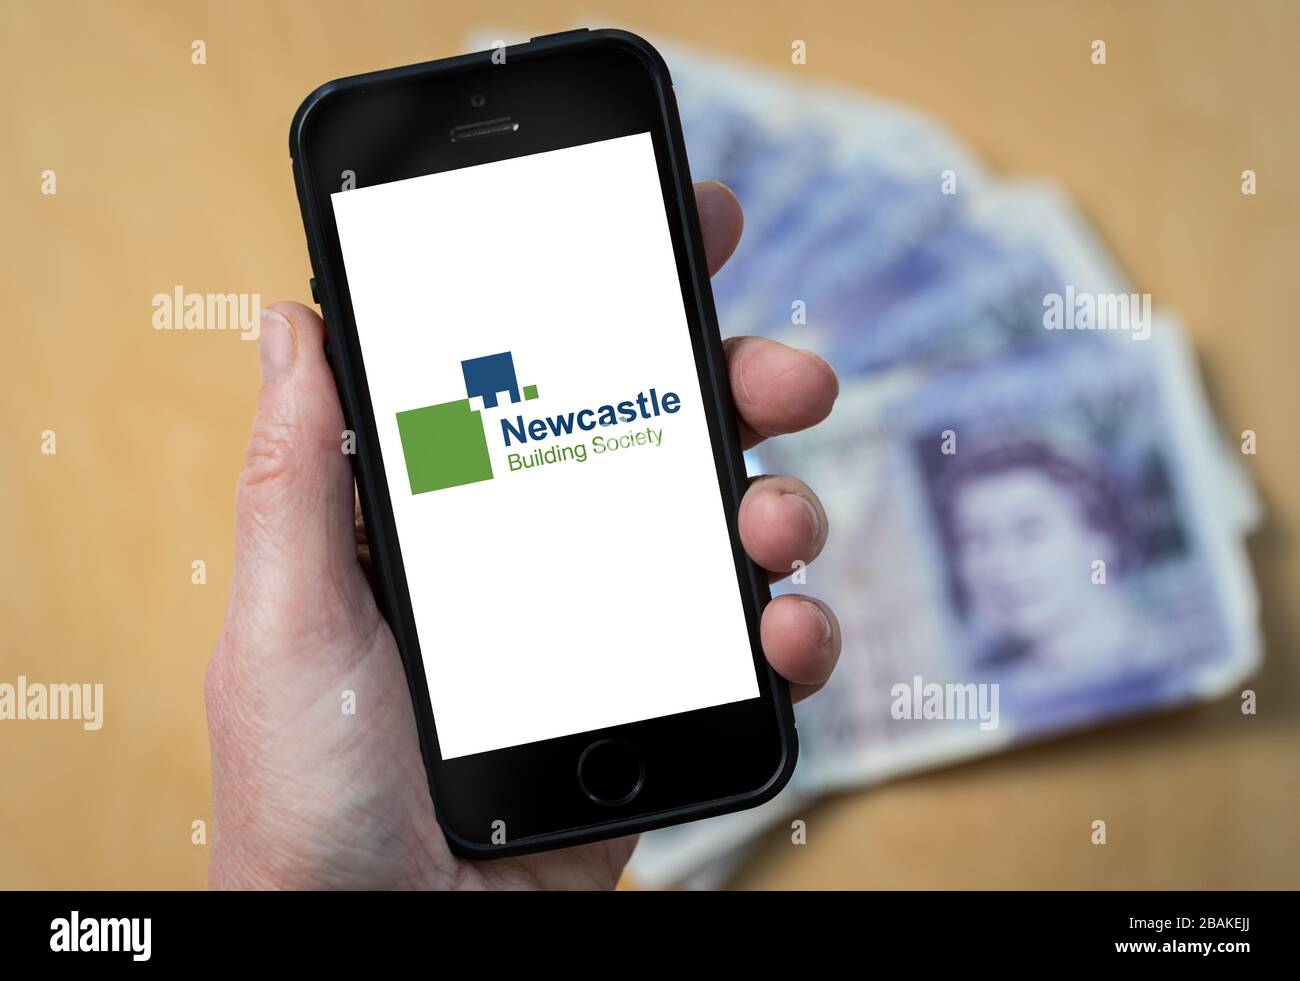 A woman holding a mobile phone showing Newcastle Building Society (editorial use only) Stock Photo